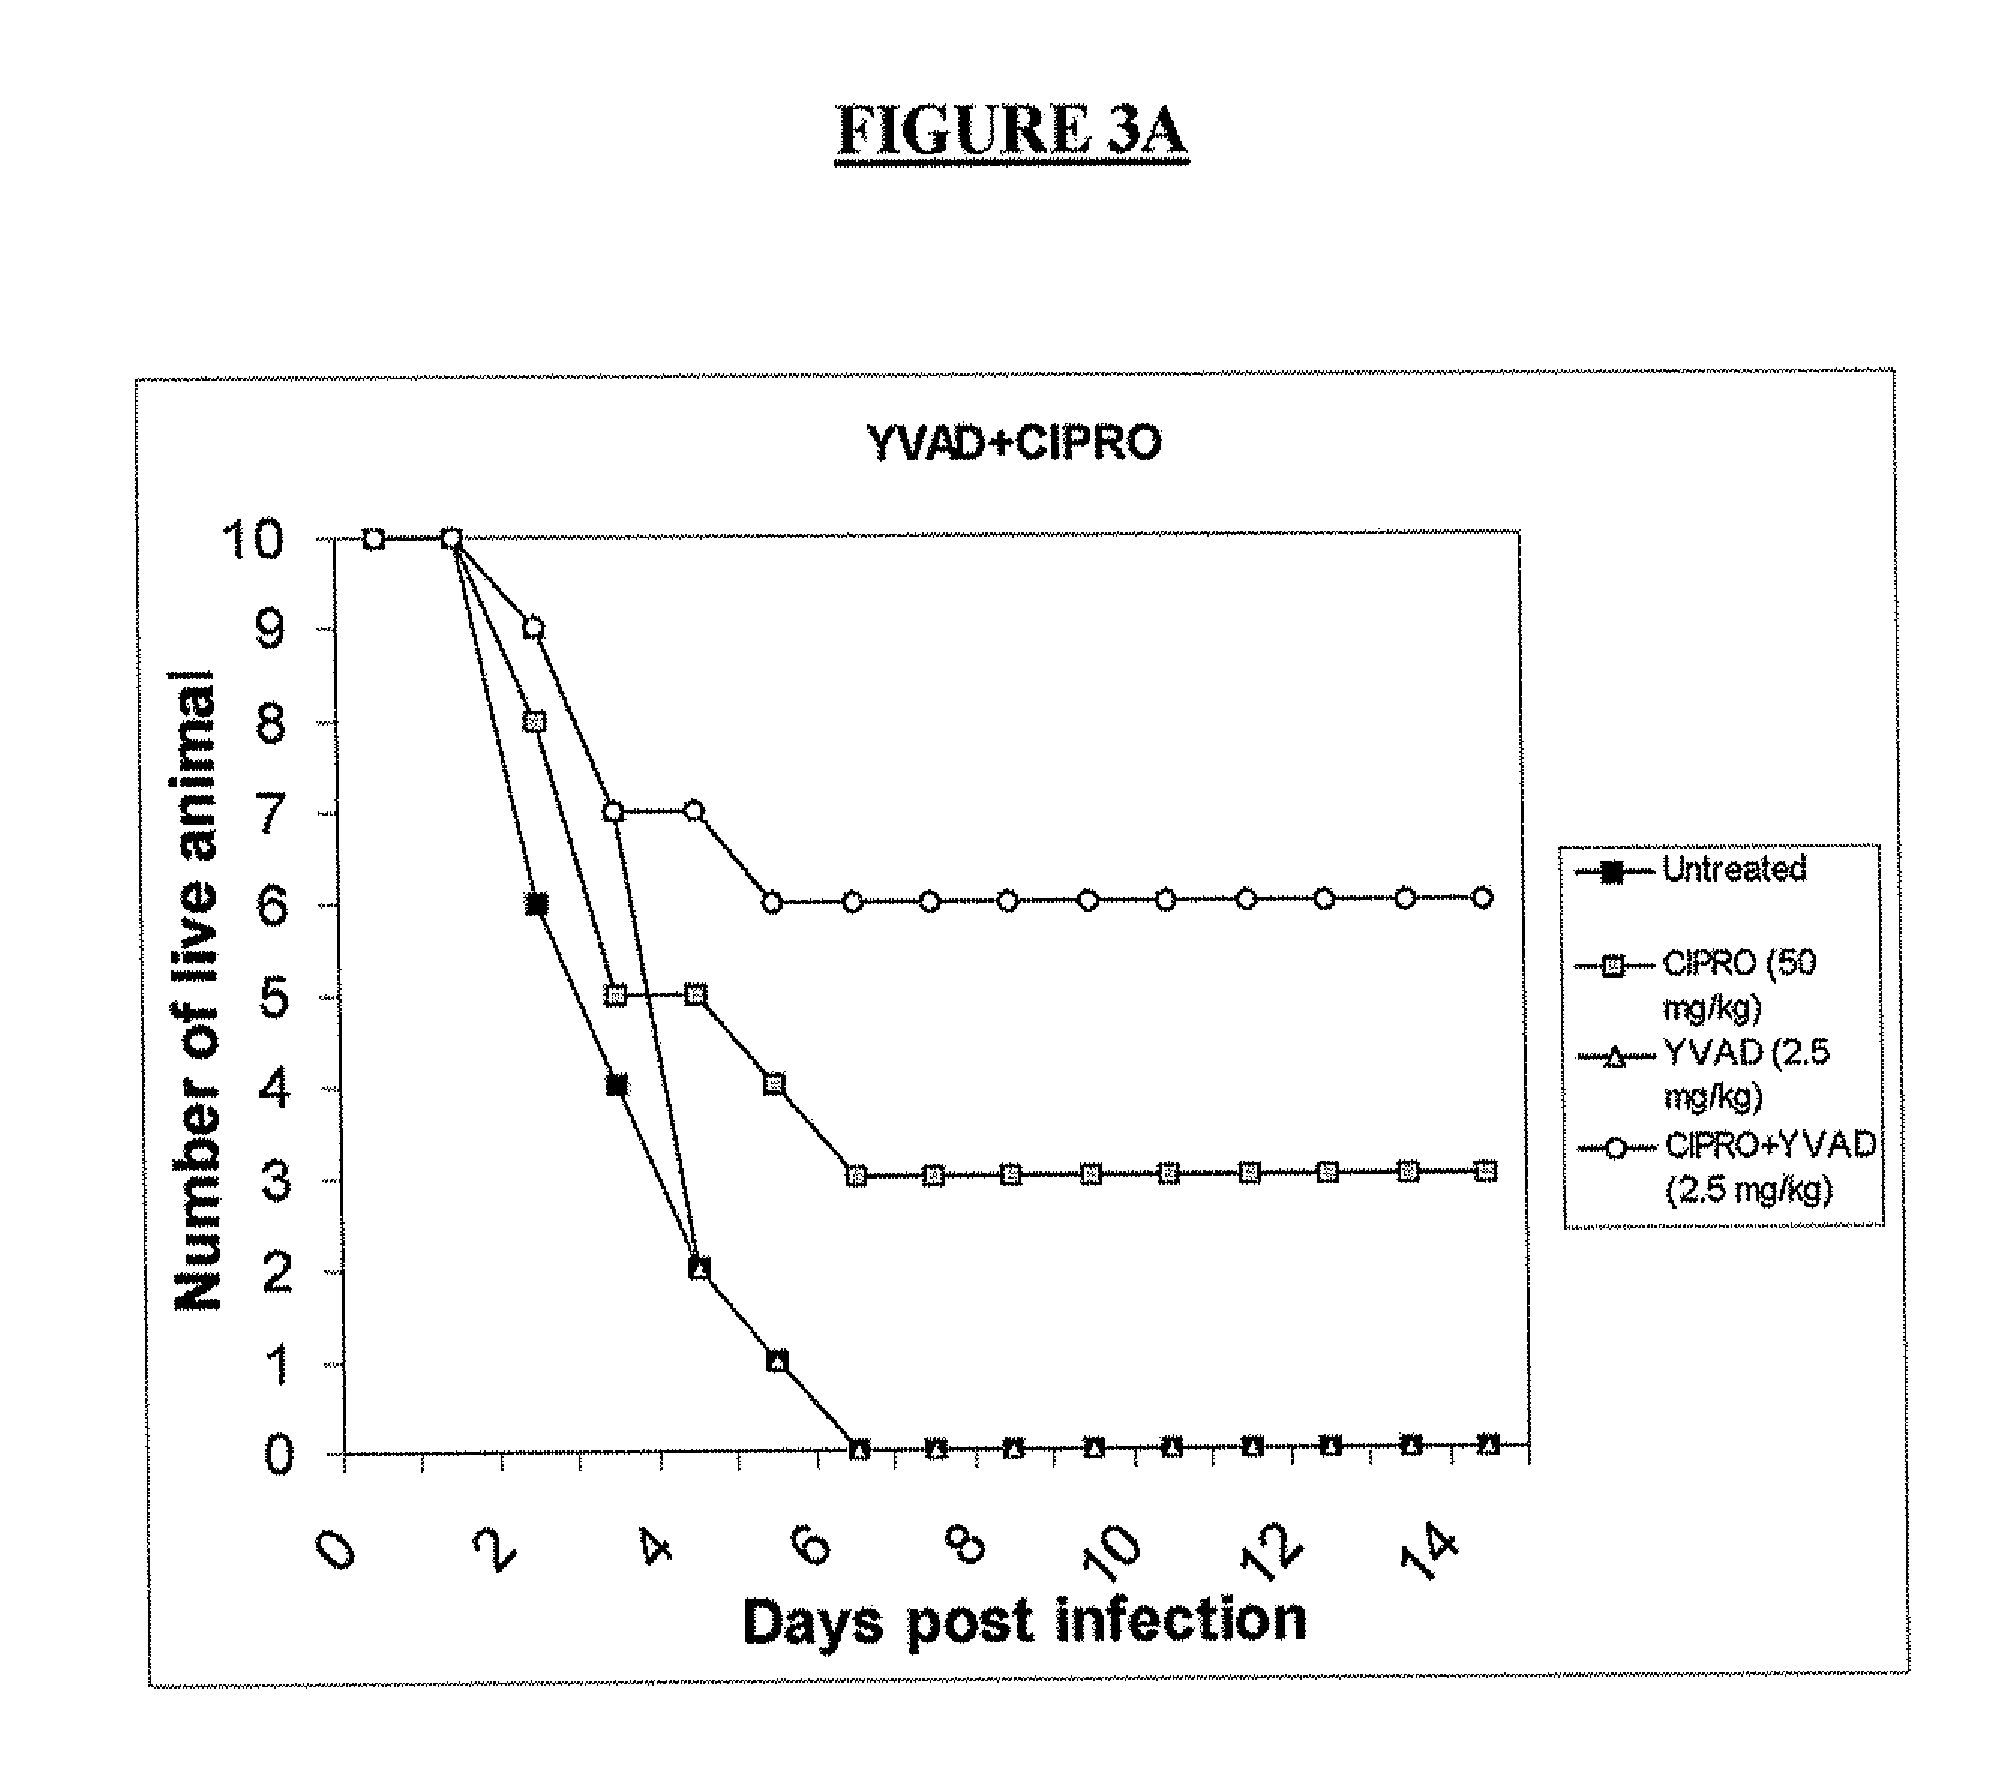 Post-exposure prophylaxis and treatment of infections